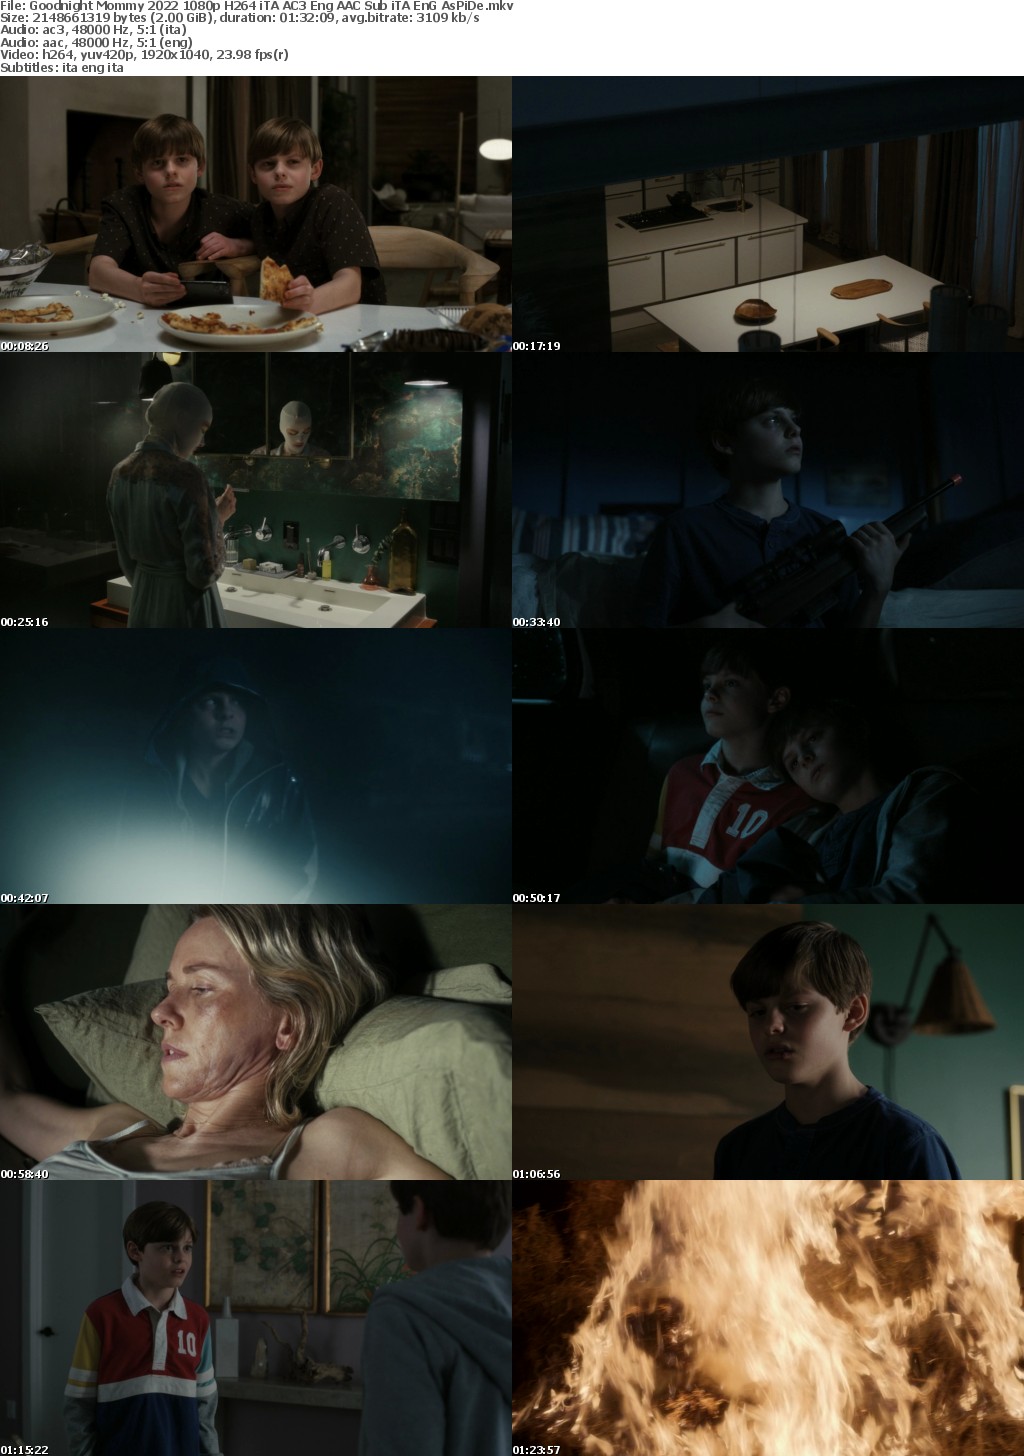 Goodnight Mommy 2022 1080p H264 iTA AC3 Eng AAC Sub iTA EnG AsPiDe